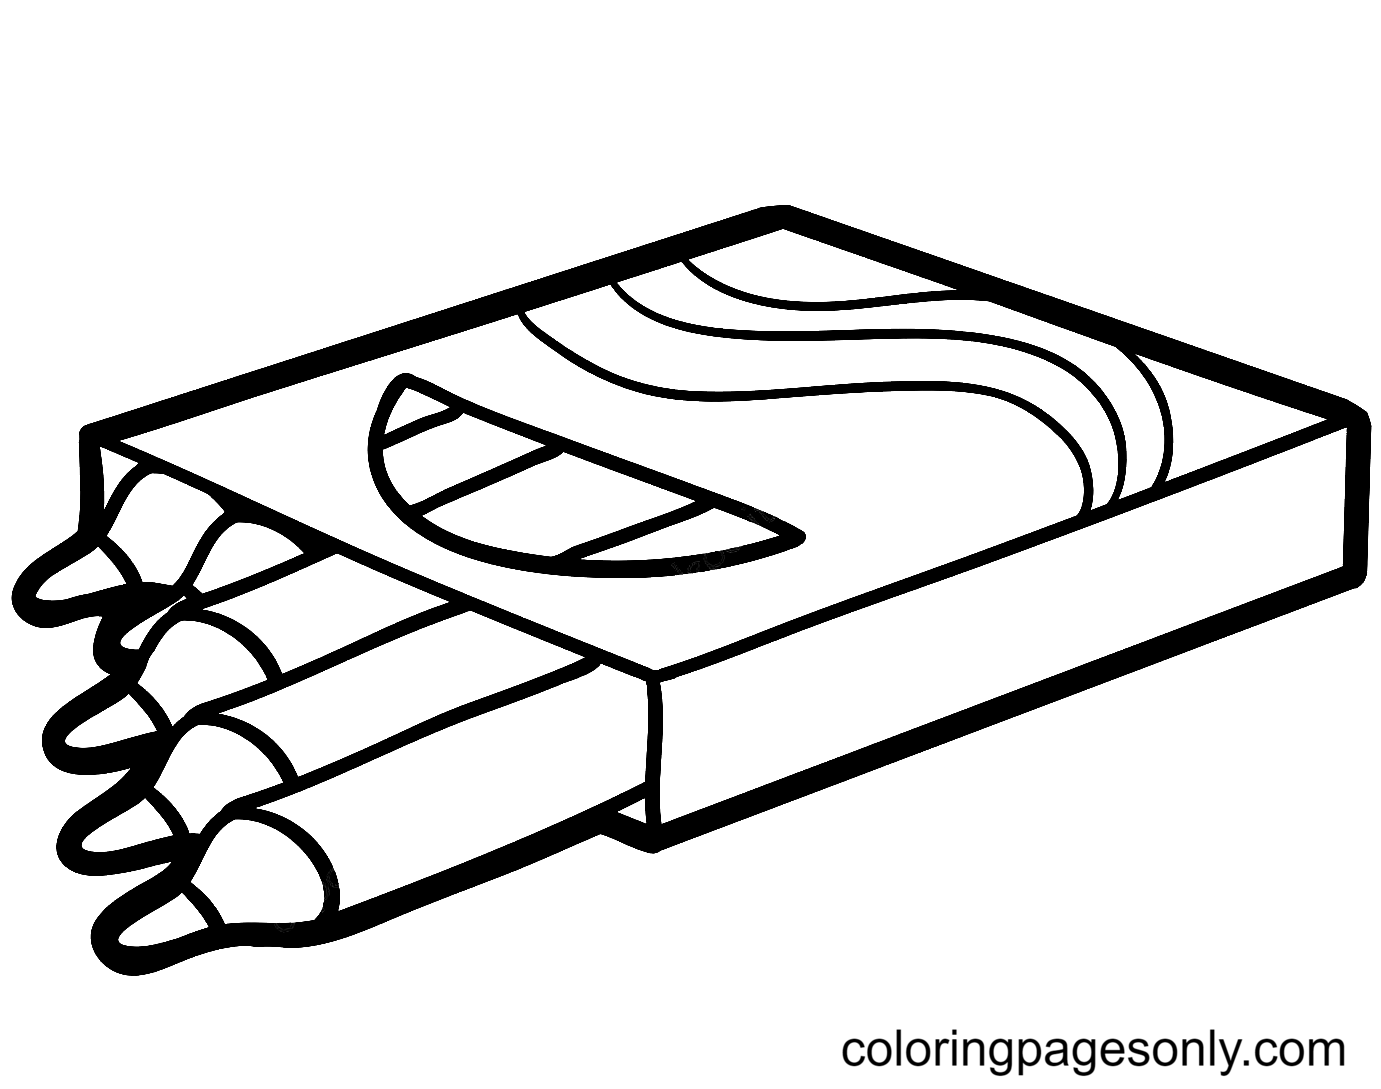 Crayons Box for Children Coloring Pages